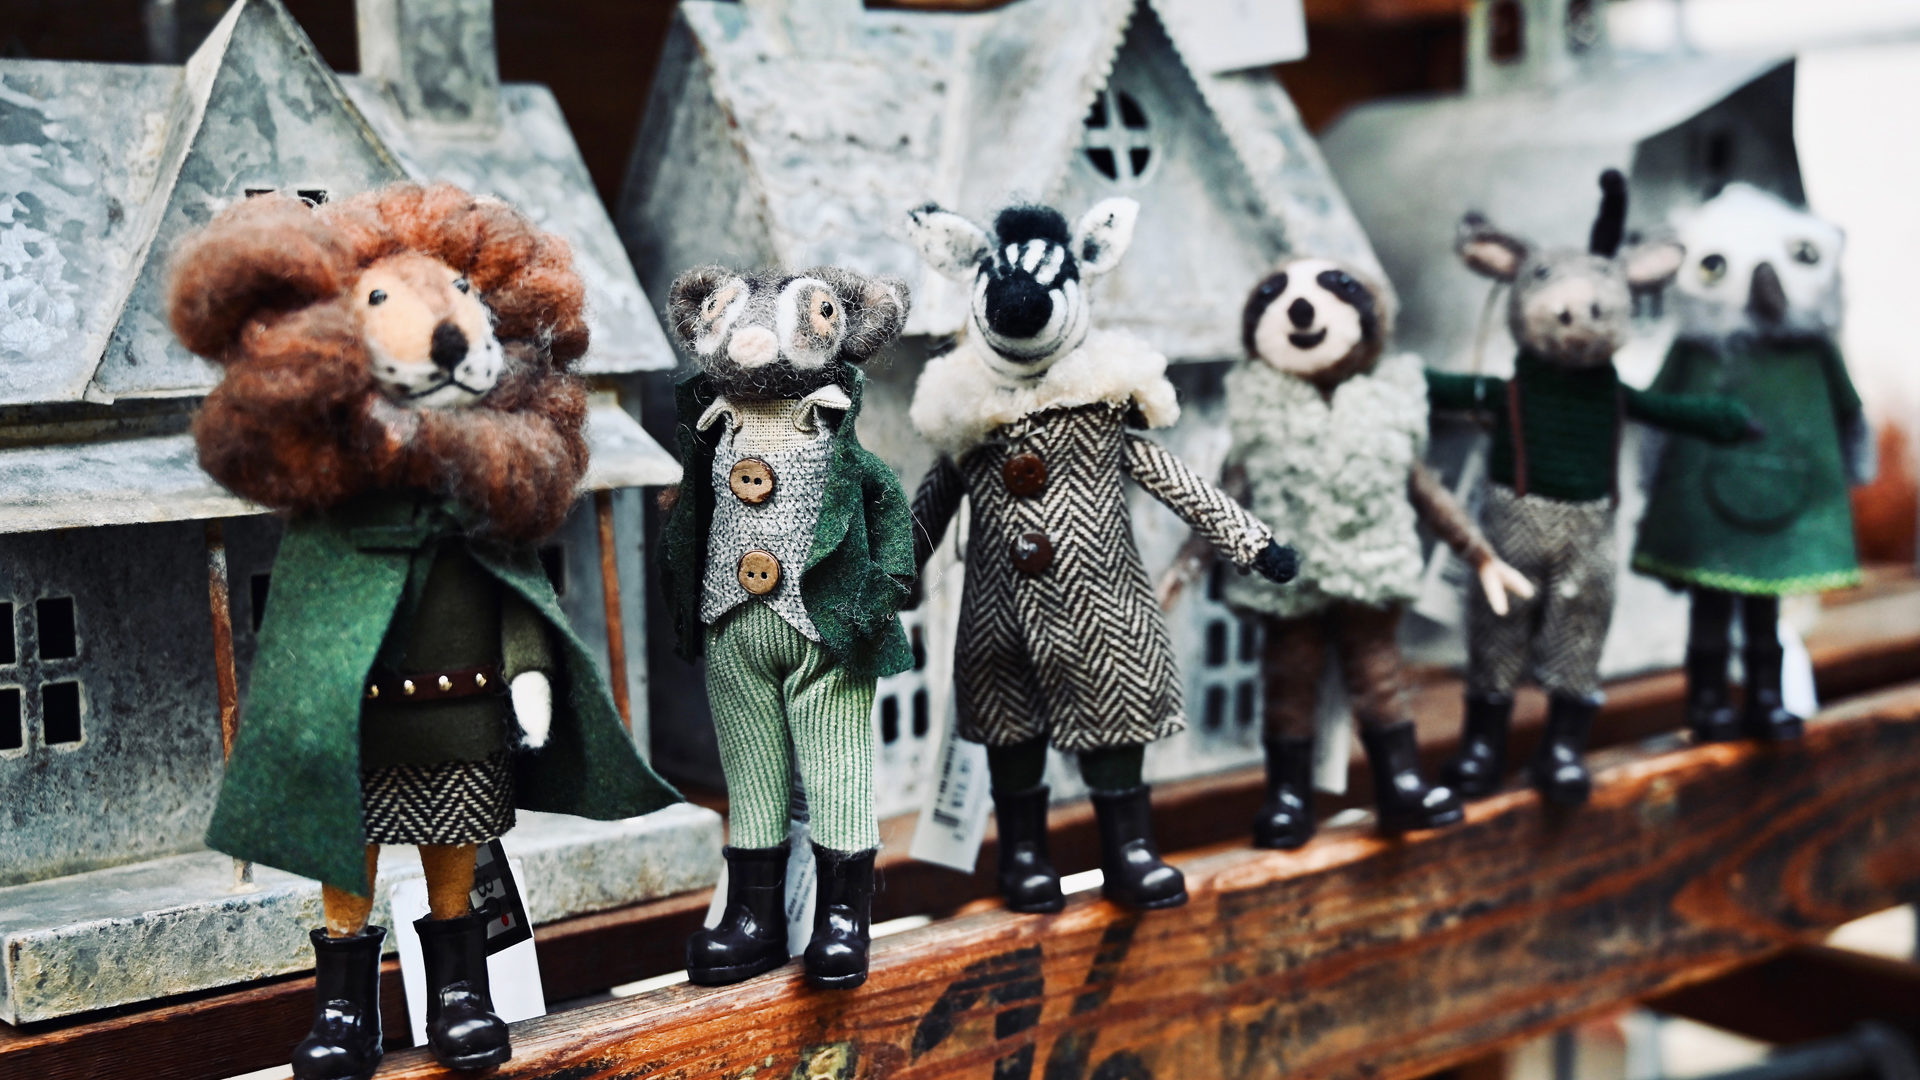 Little Zinc Houses and the Dapper Animal Figures To Go With - Detroit Garden Works